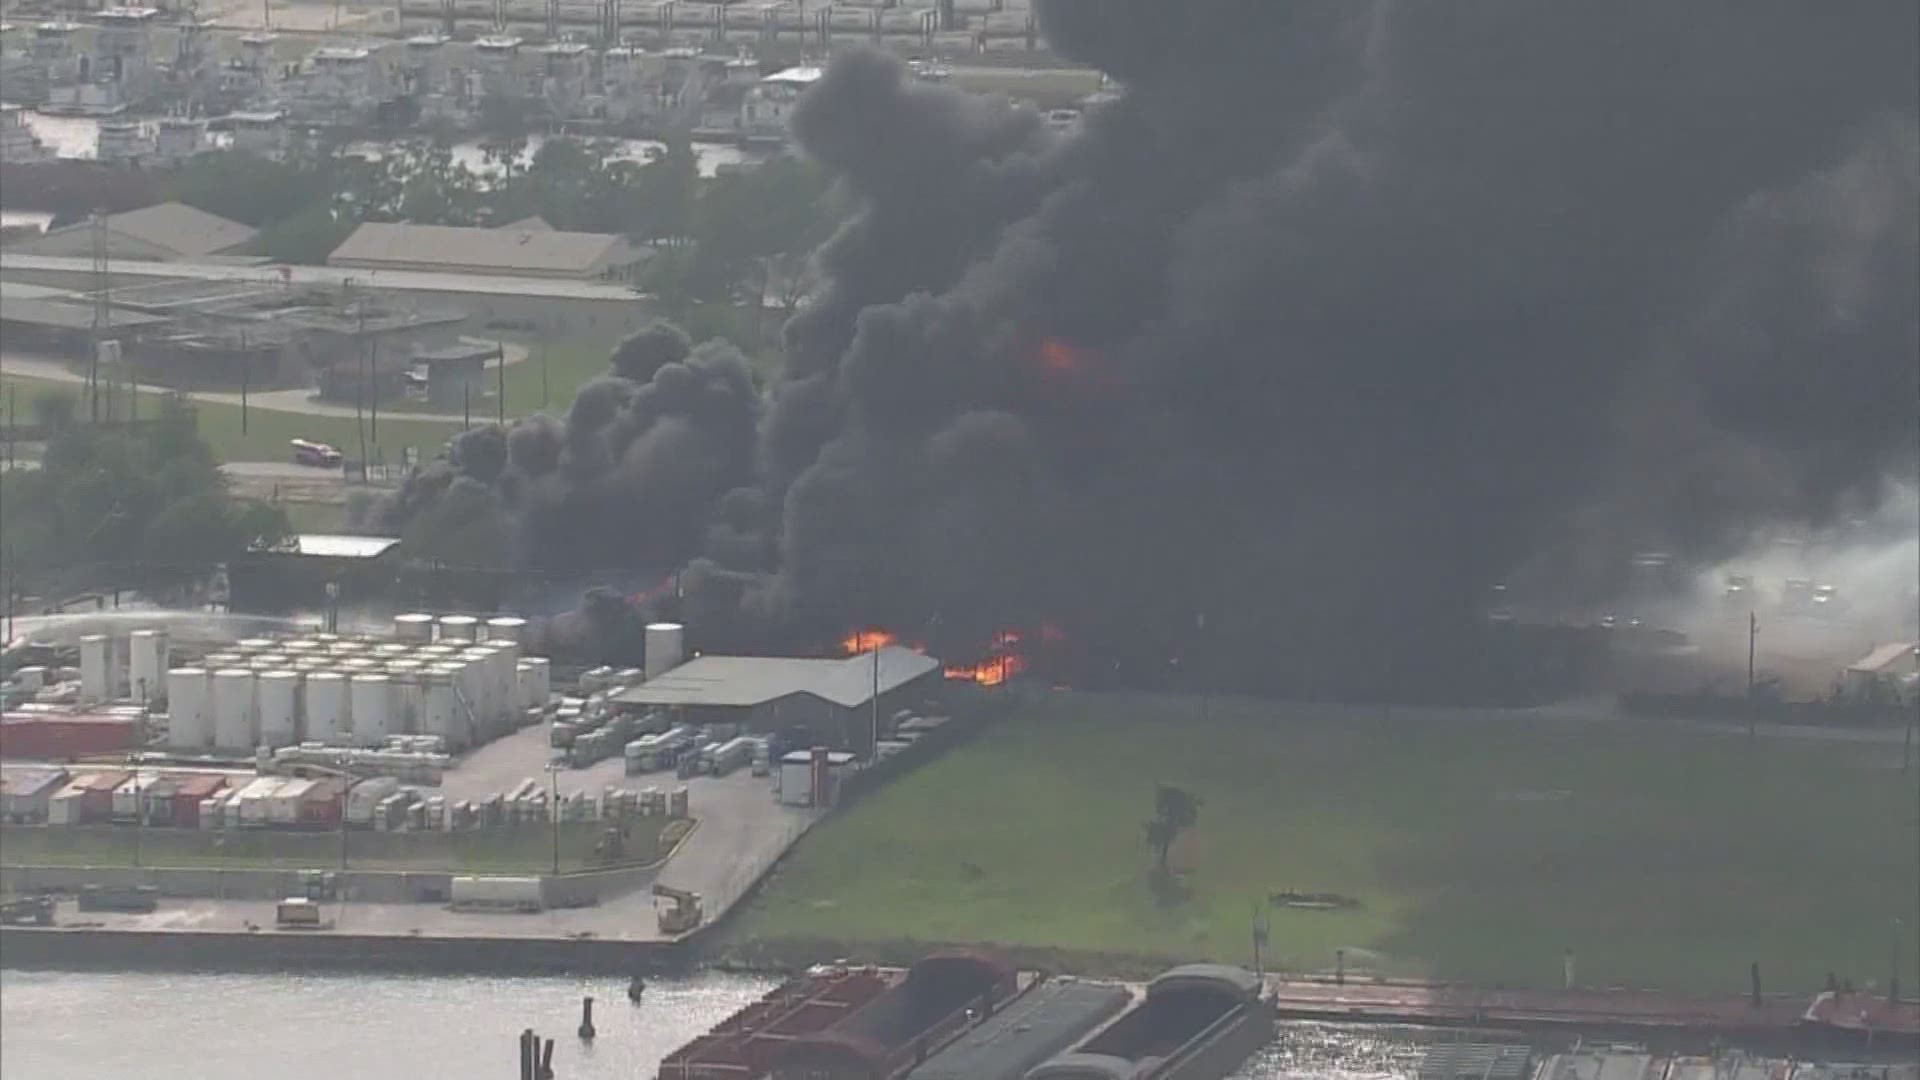 Investigators from the Harris County Fire Marshal’s office began looking Thursday into what ignited an industrial fire in Channelview the day before.